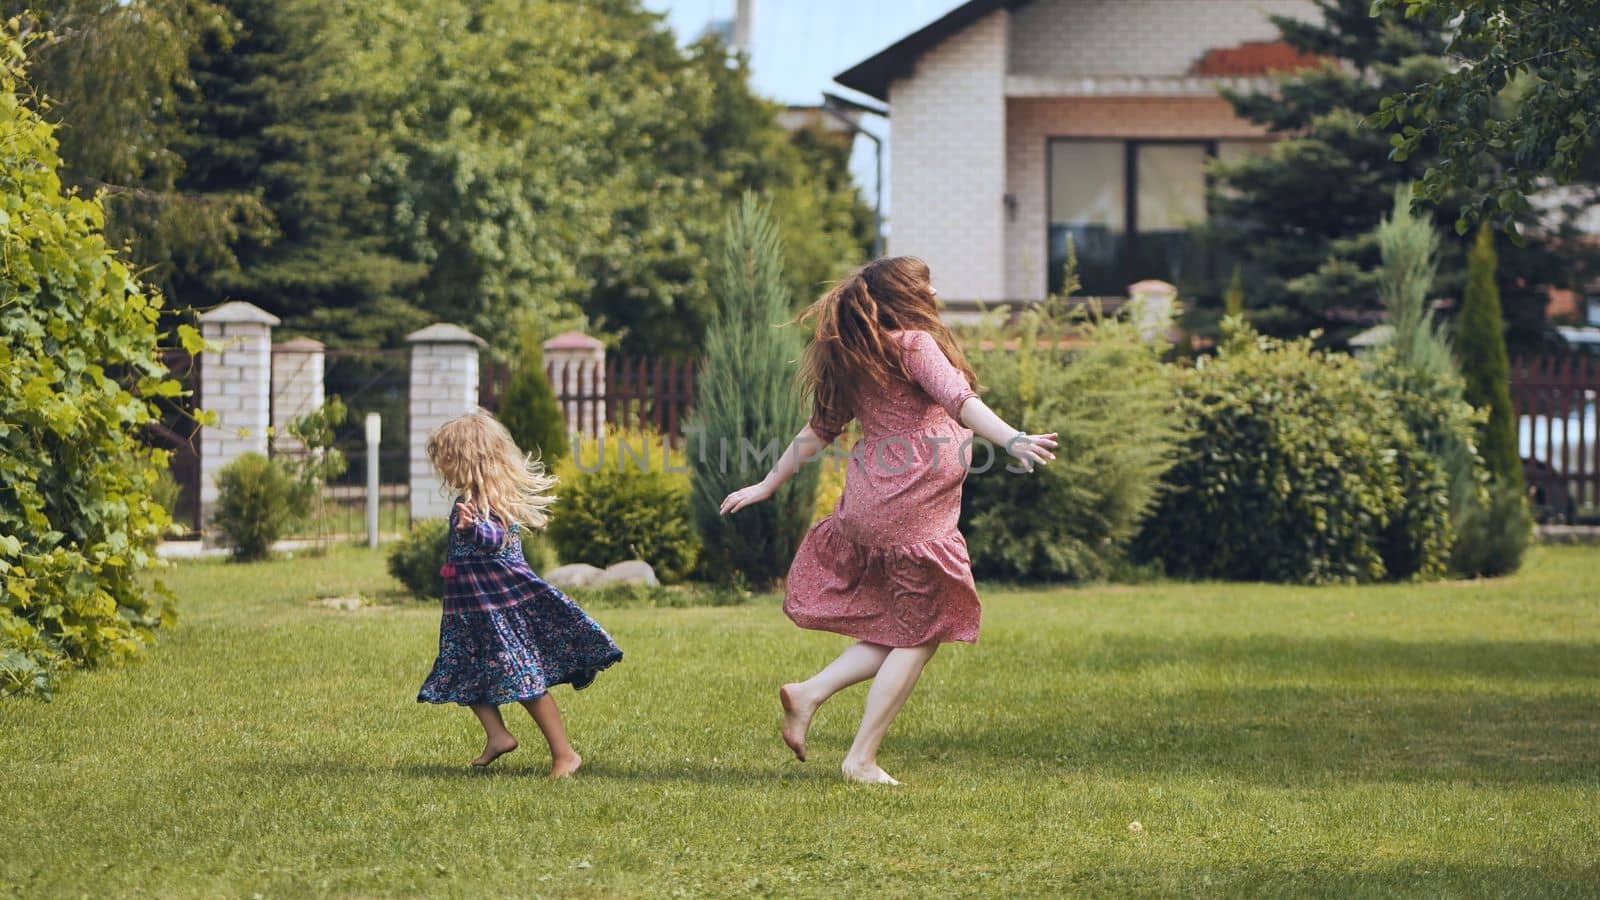 A mother and her daughter twirl in the garden outside the house